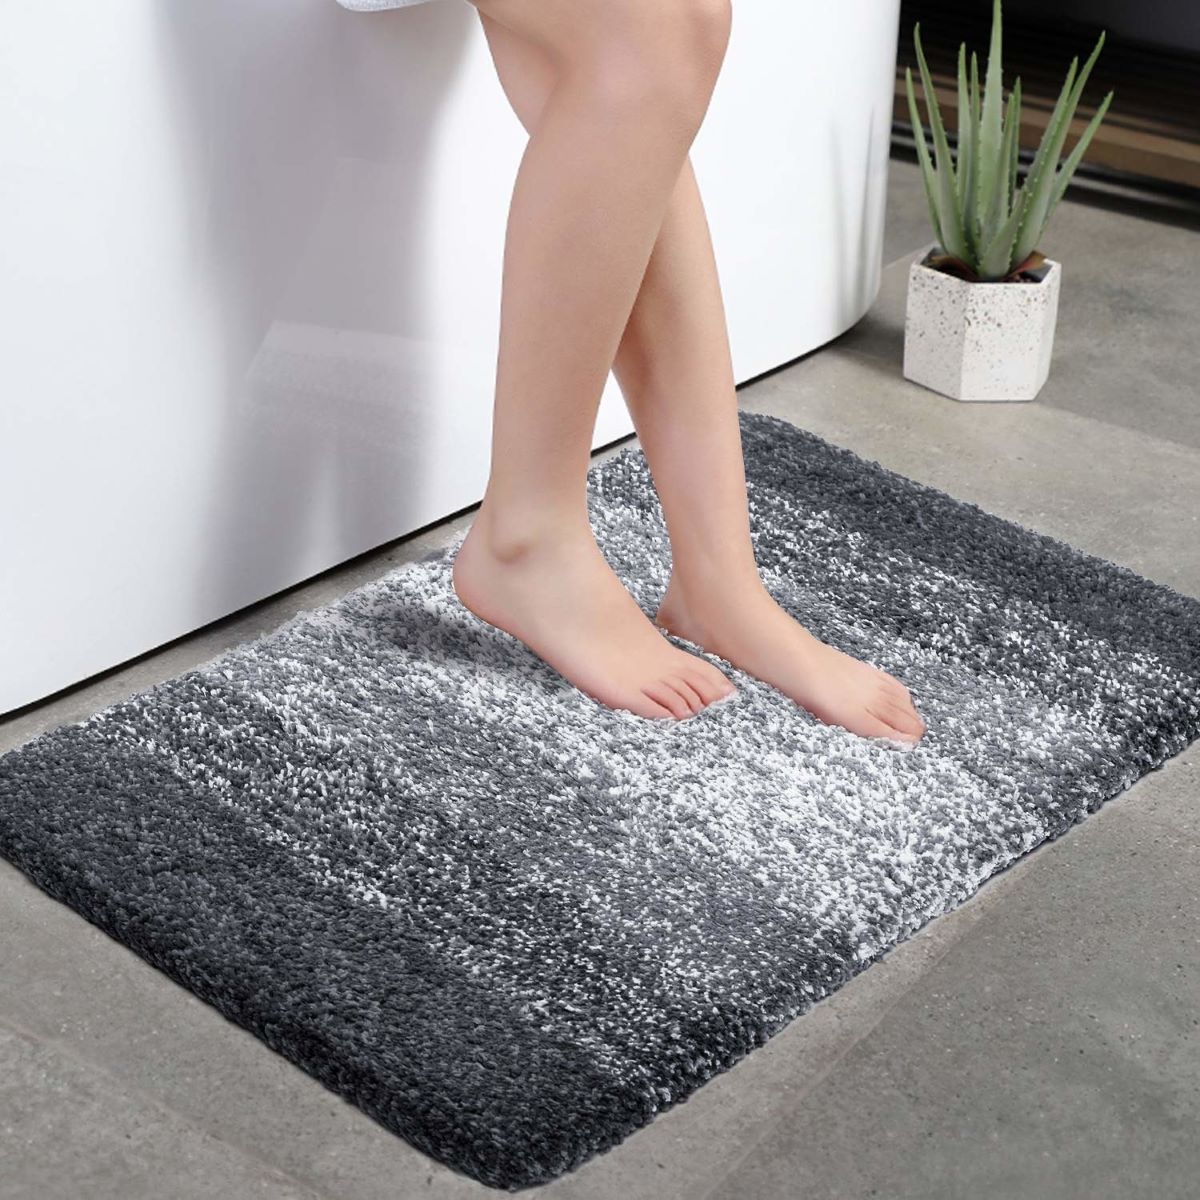 What Are The Best Bathroom Rugs